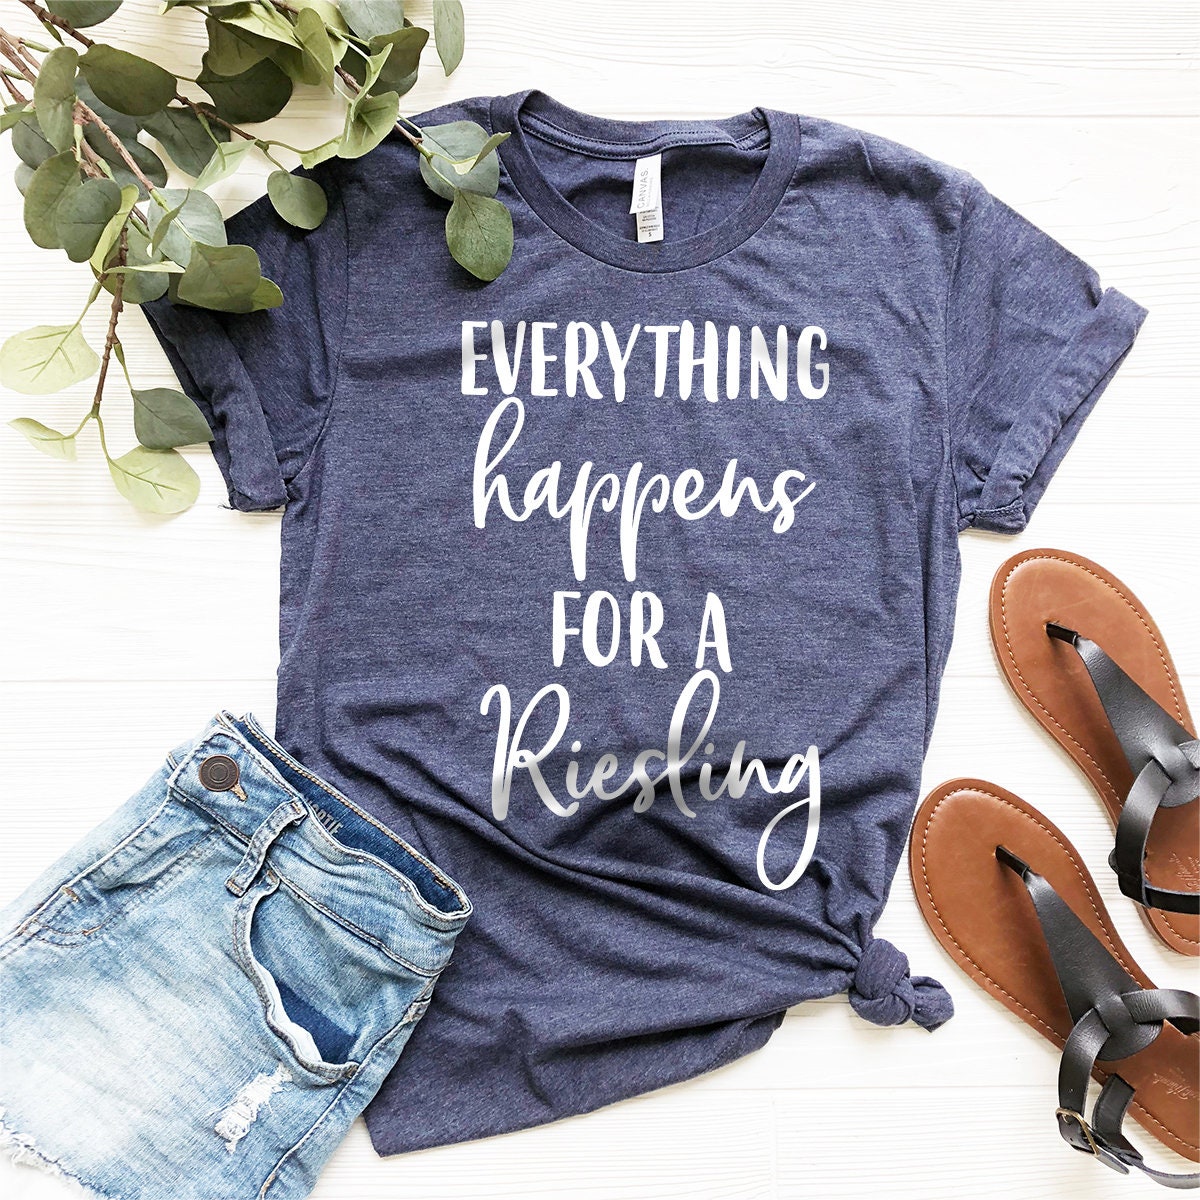 Wine Shirt, Everything Happens For A Riesling Shirt, Wine Lover Shirt, Wine Tee, Funny Wine Shirt, Drinking Shirt, Gift For Wine Lover - Fastdeliverytees.com